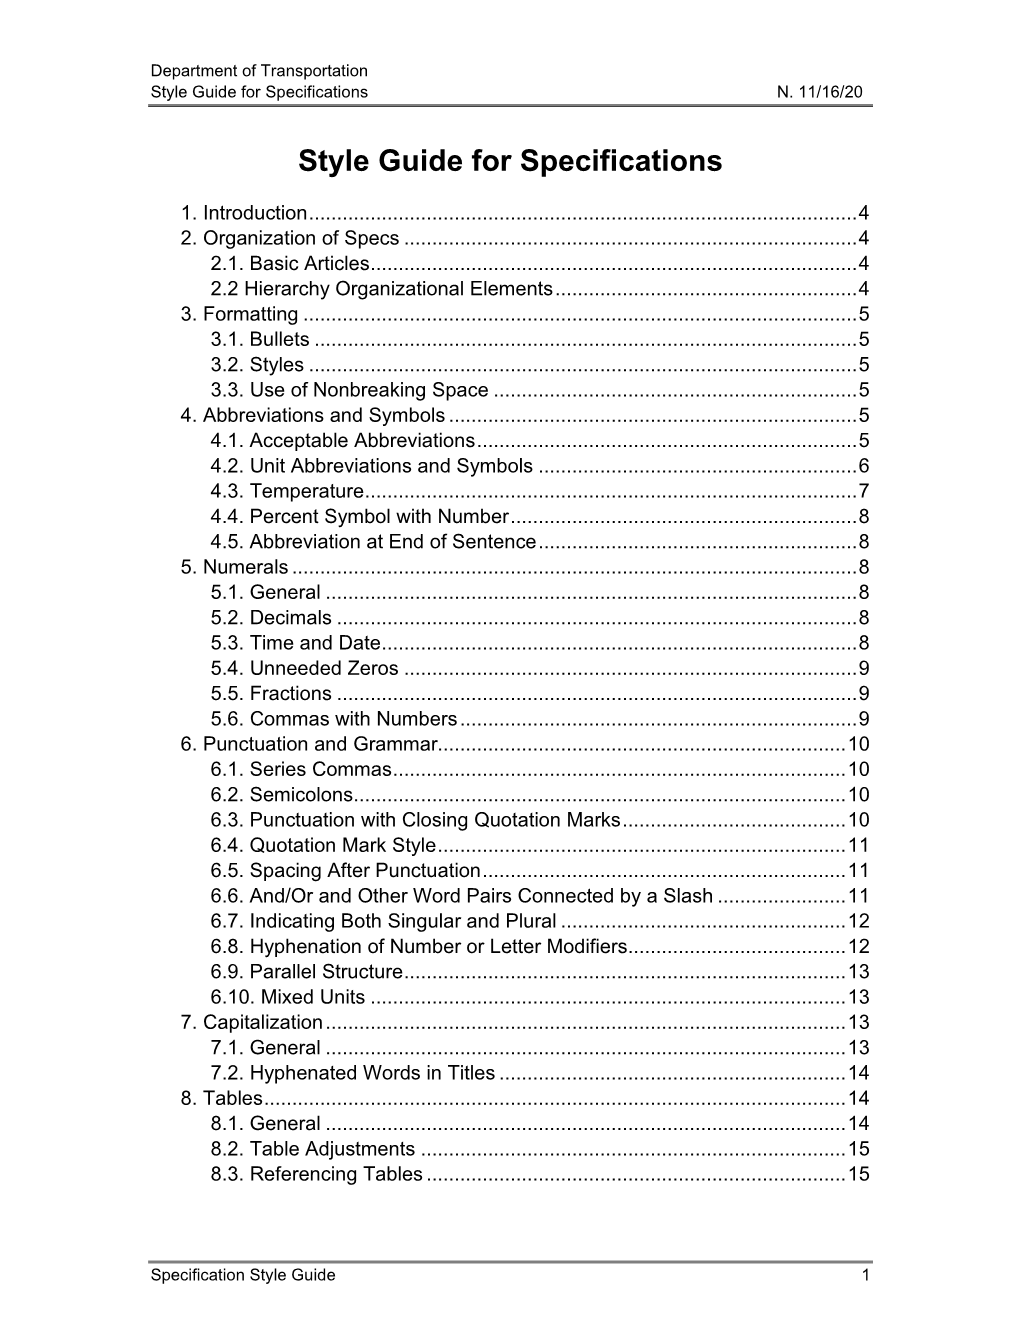 Style Guide for Specifications N